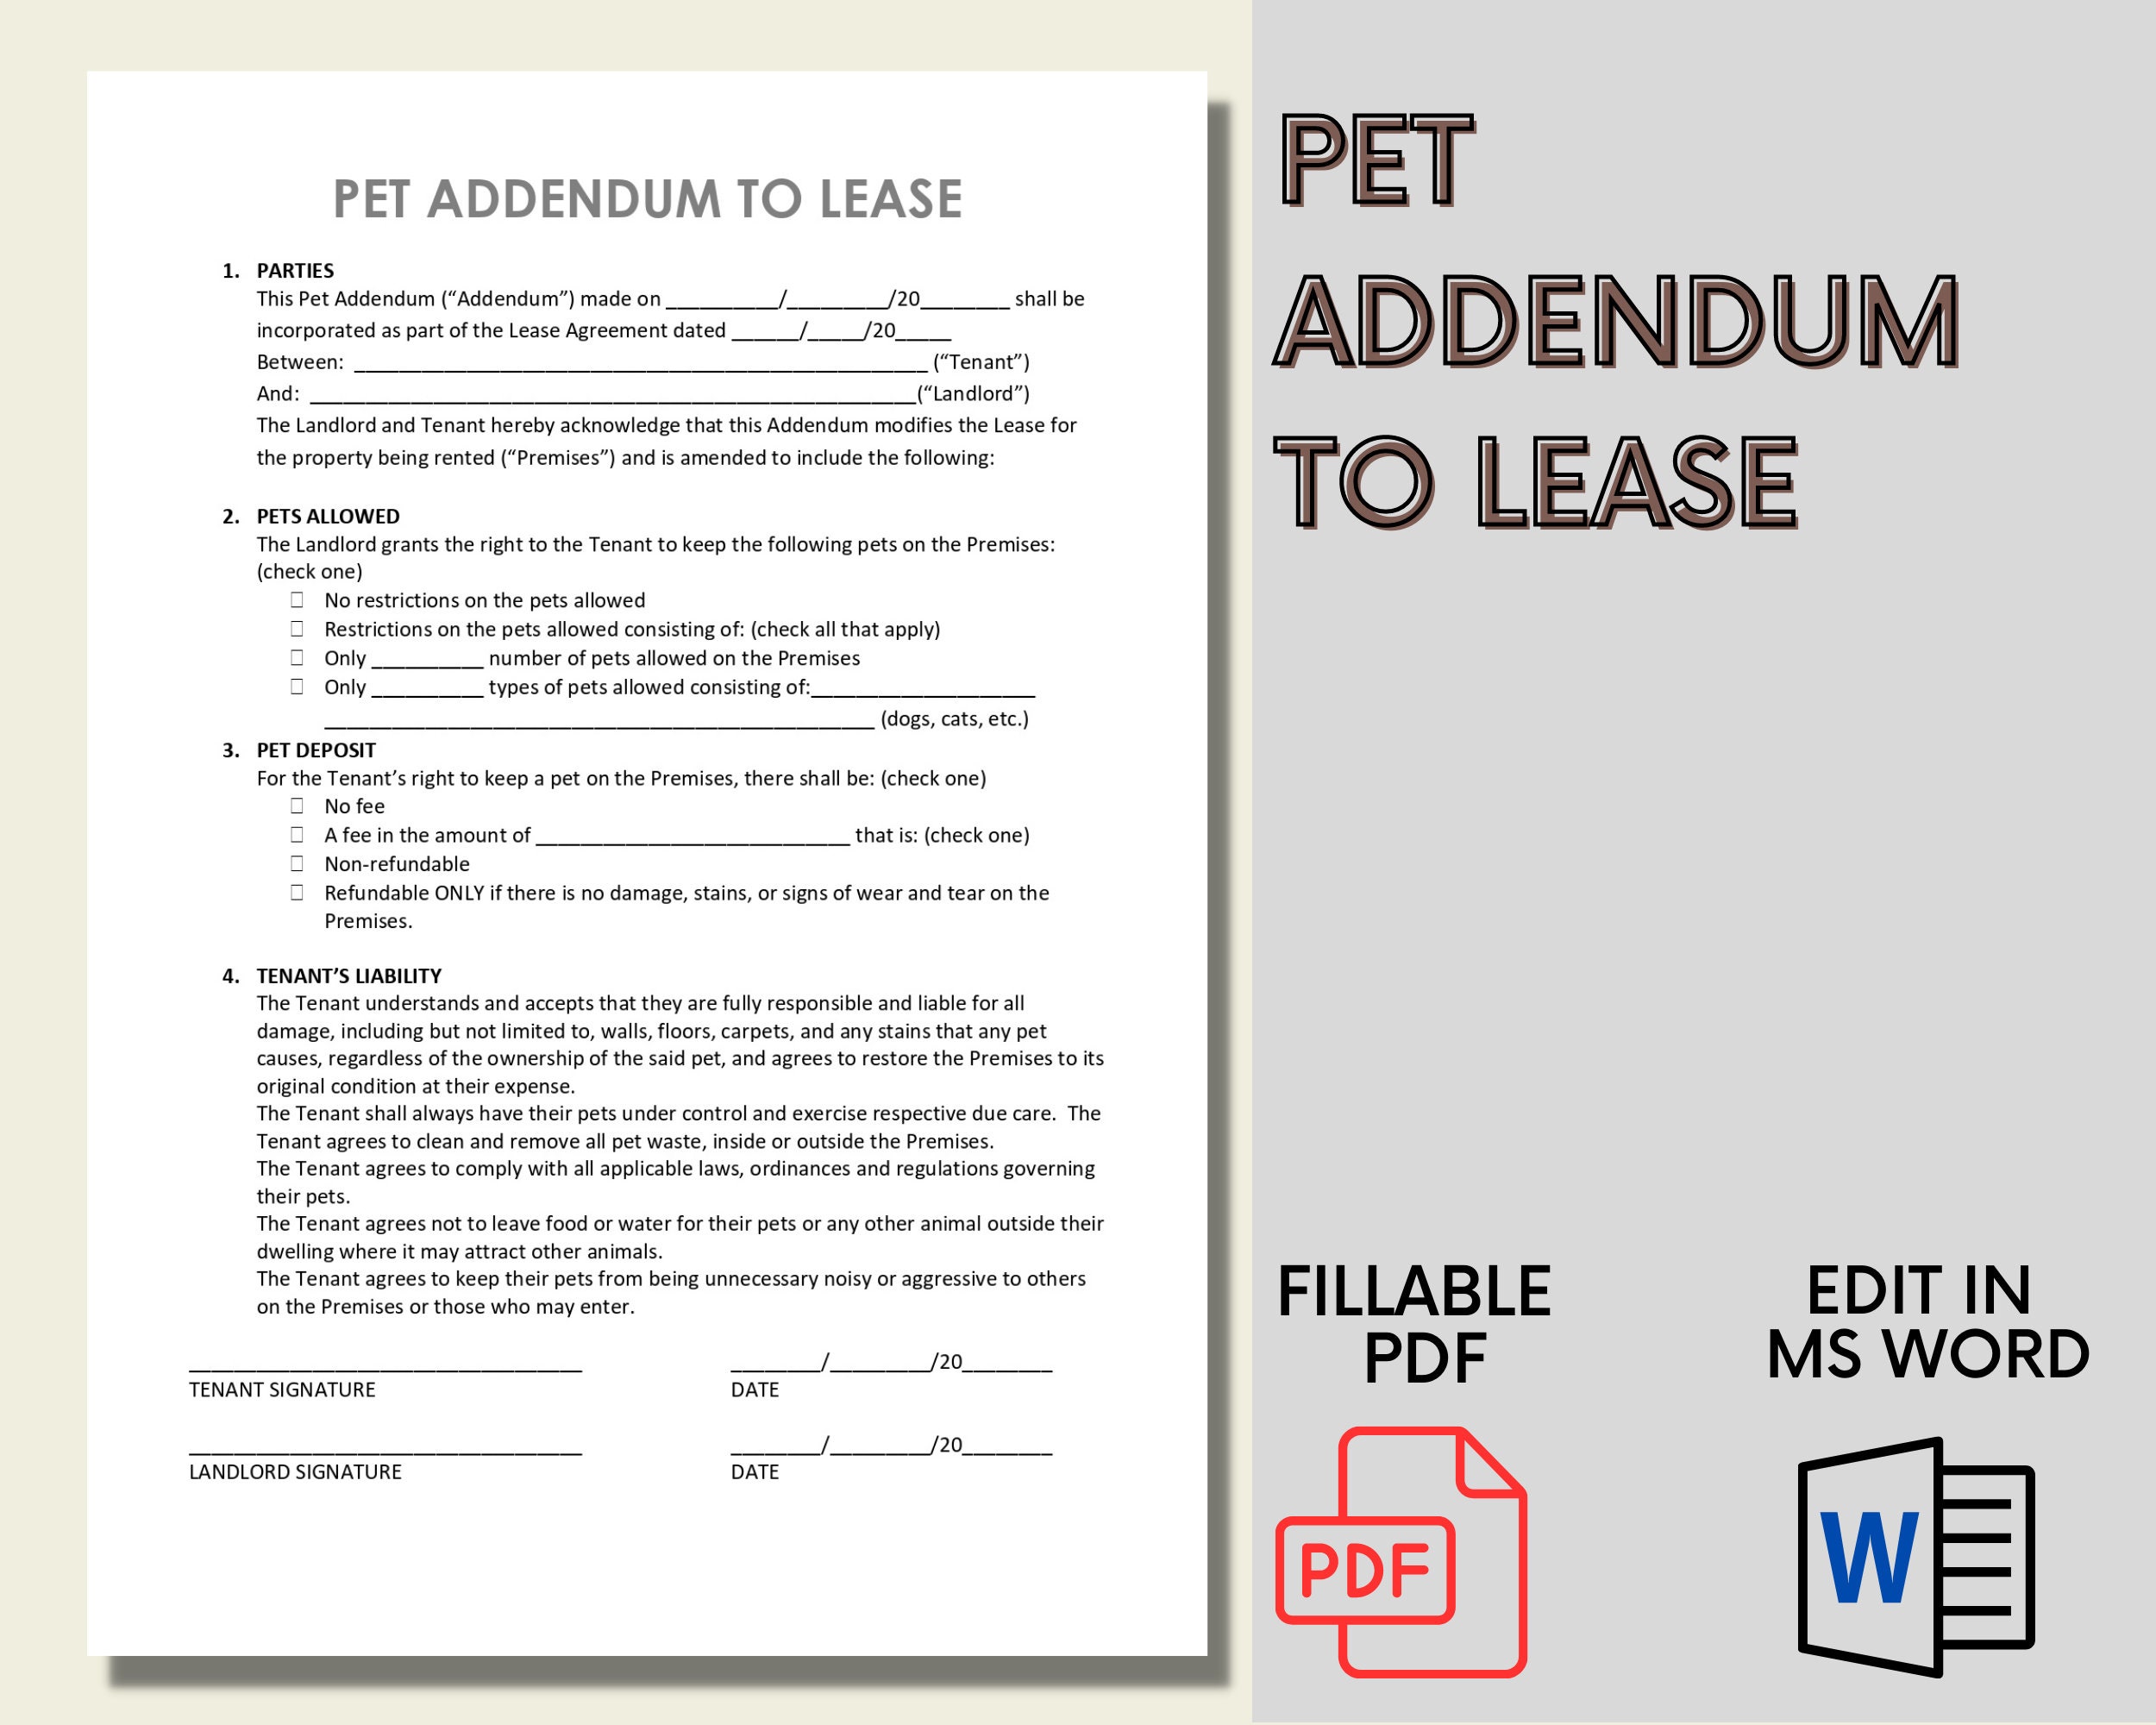 pet-addendum-to-lease-agreement-tenant-pet-restriction-editable-ms-word